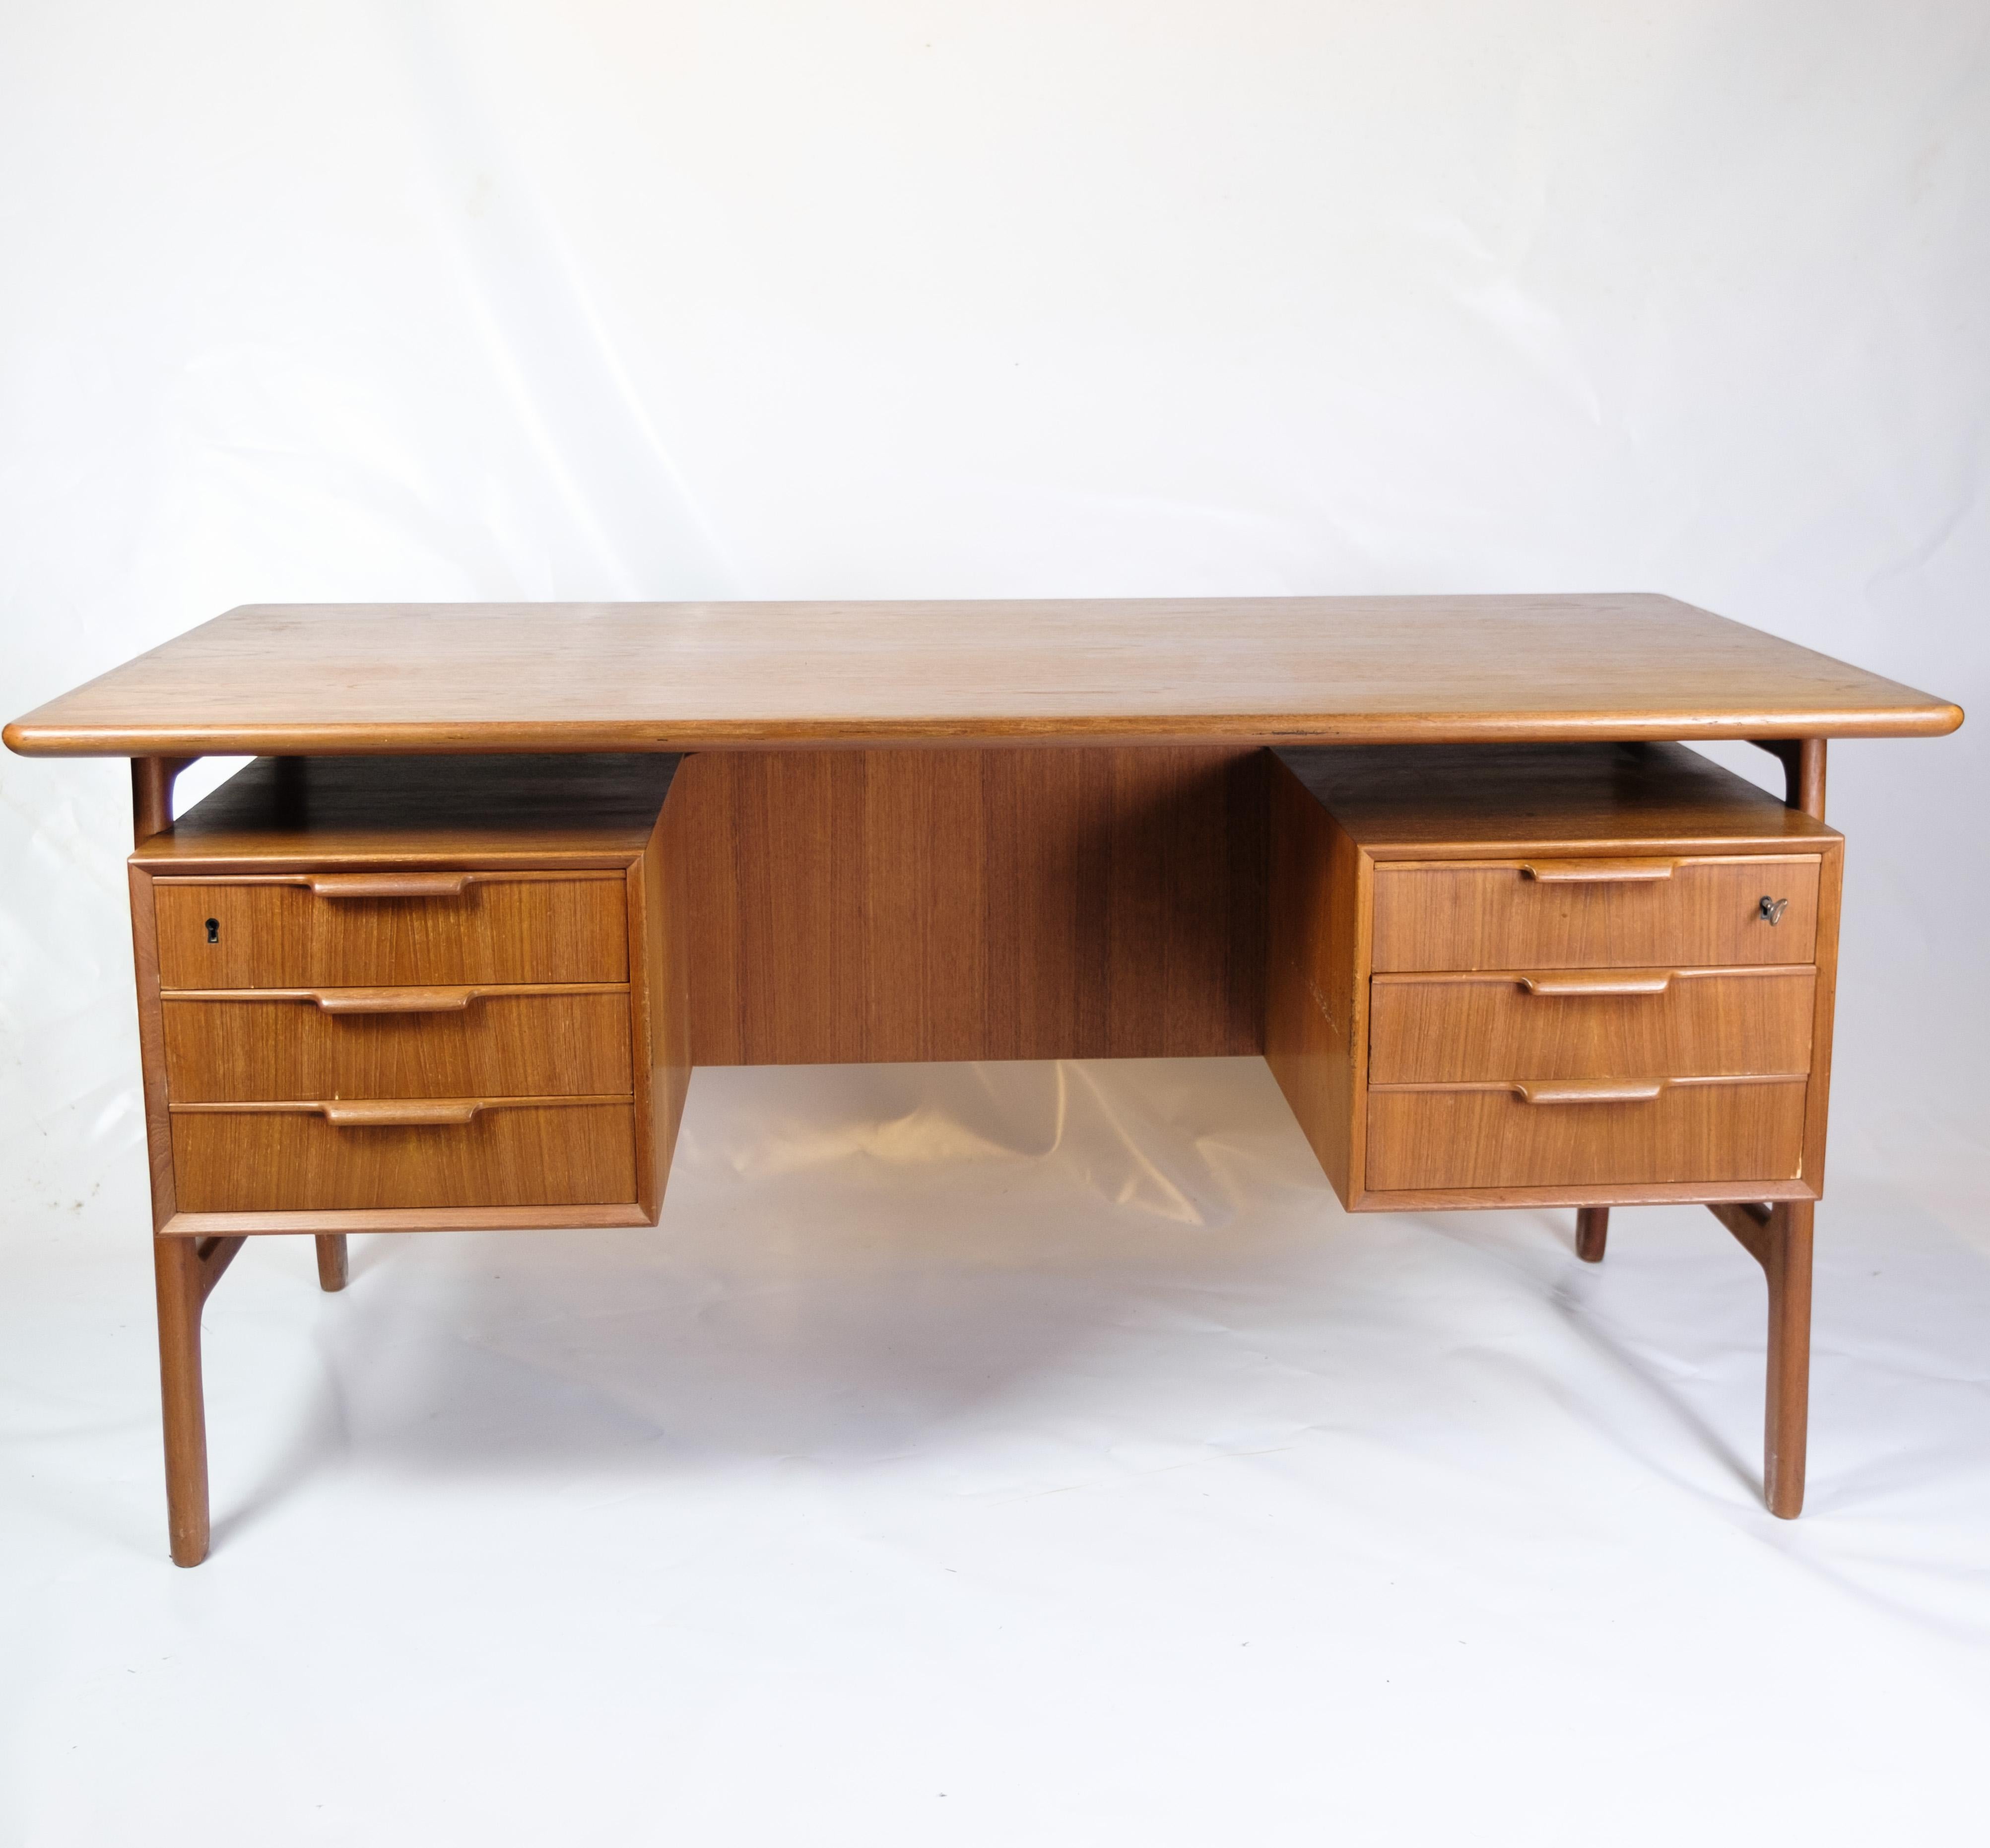 This desk, known as Model 75, is an excellent representation of Danish furniture craftsmanship from the 1960s. Produced by Omann Junior Møbelfabrik, a renowned company with a history of quality and innovation, the desk is an example of their